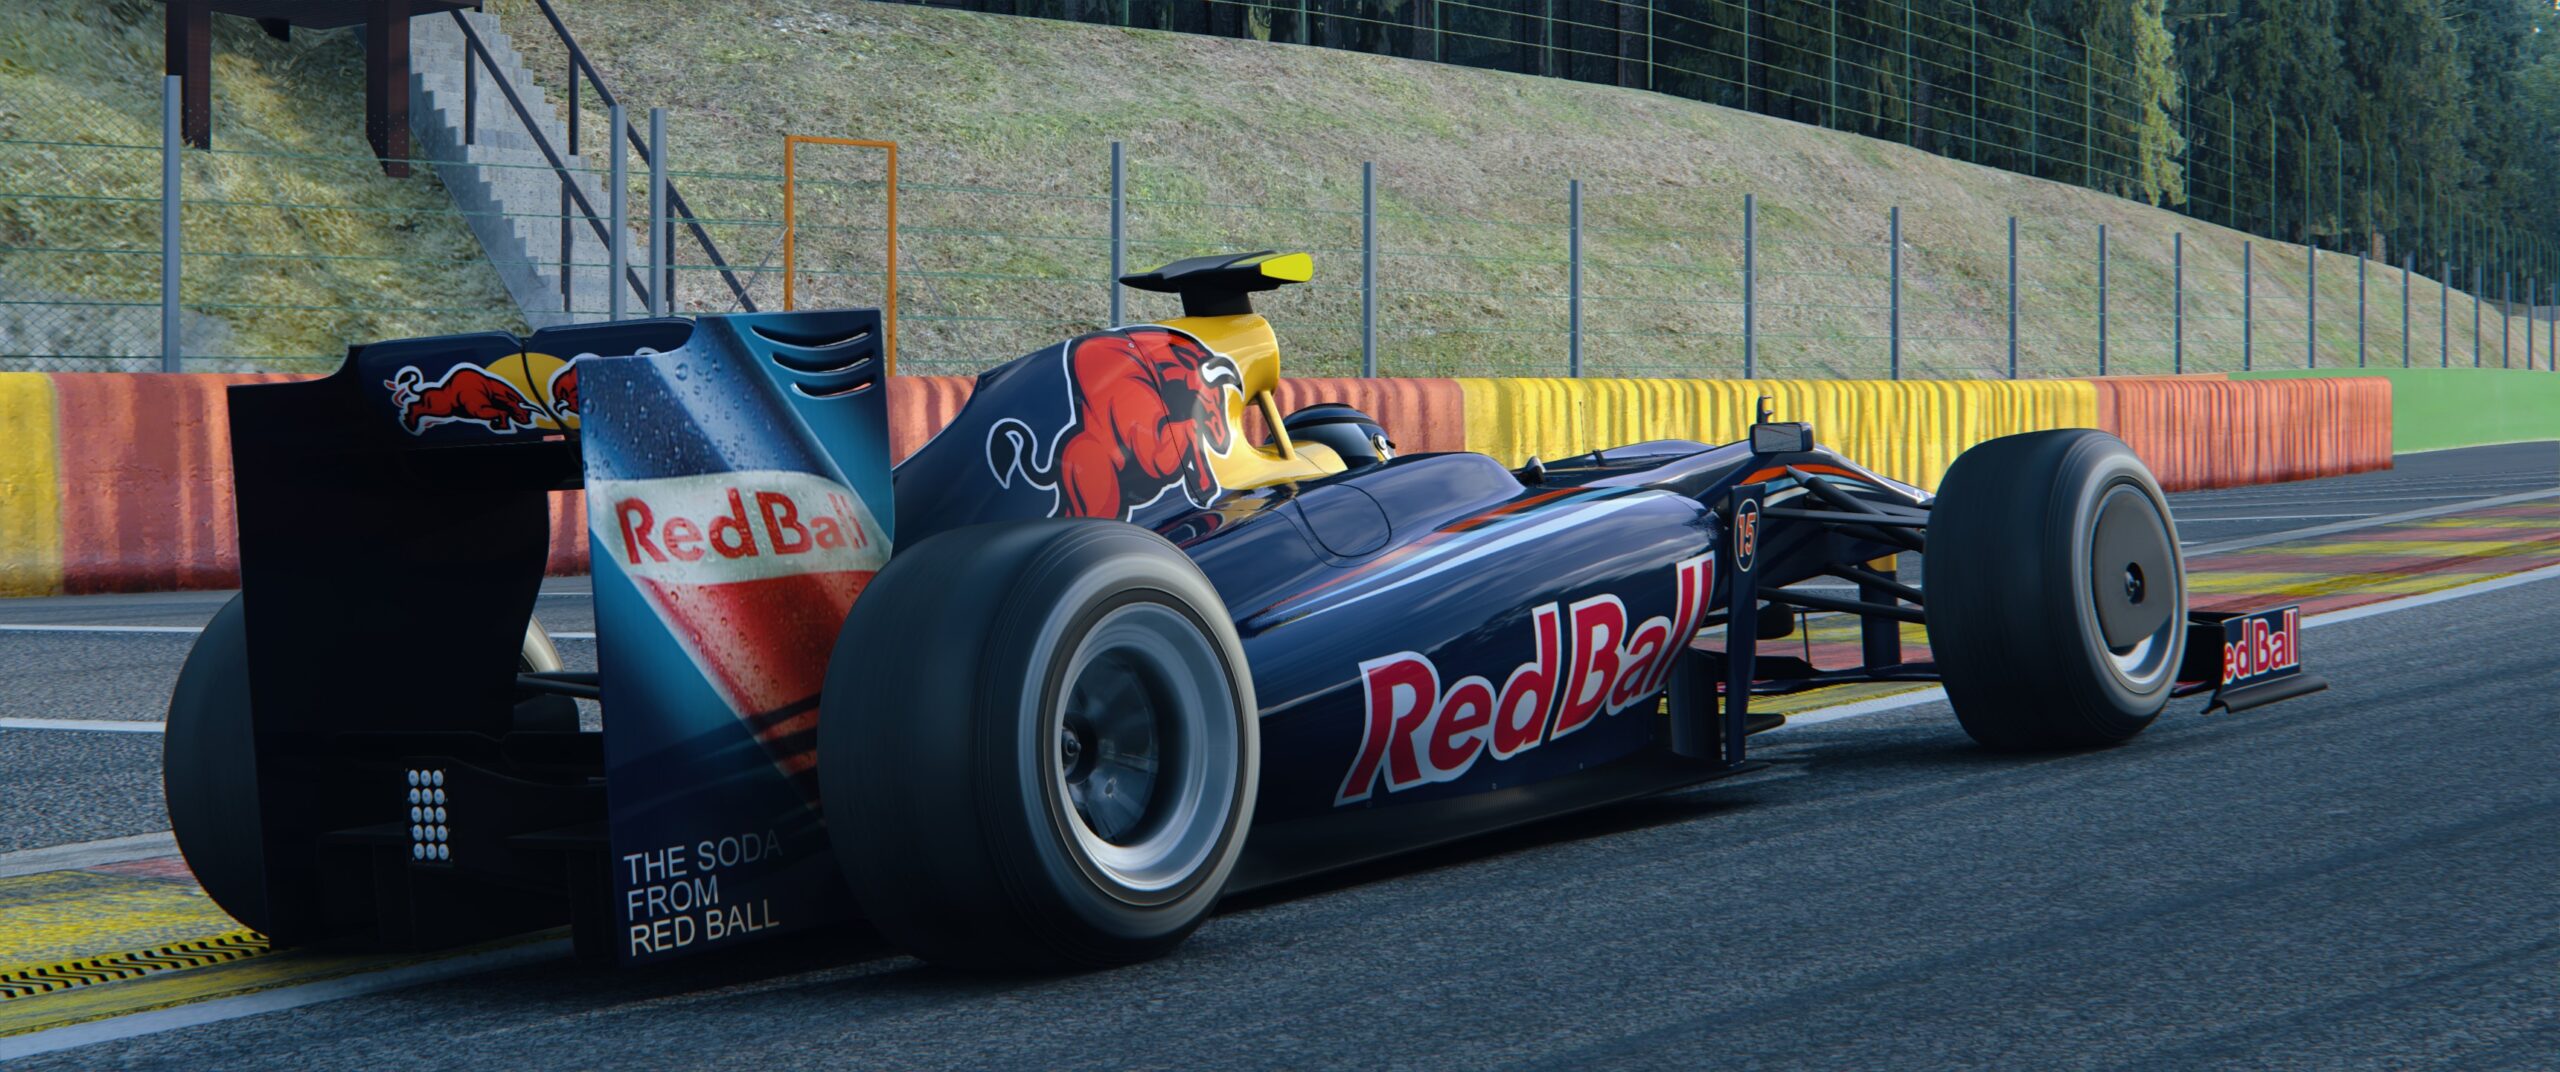 2009 Red Bull Racing Rb5 For Assetto Corsa Sounds Like A Trip Down